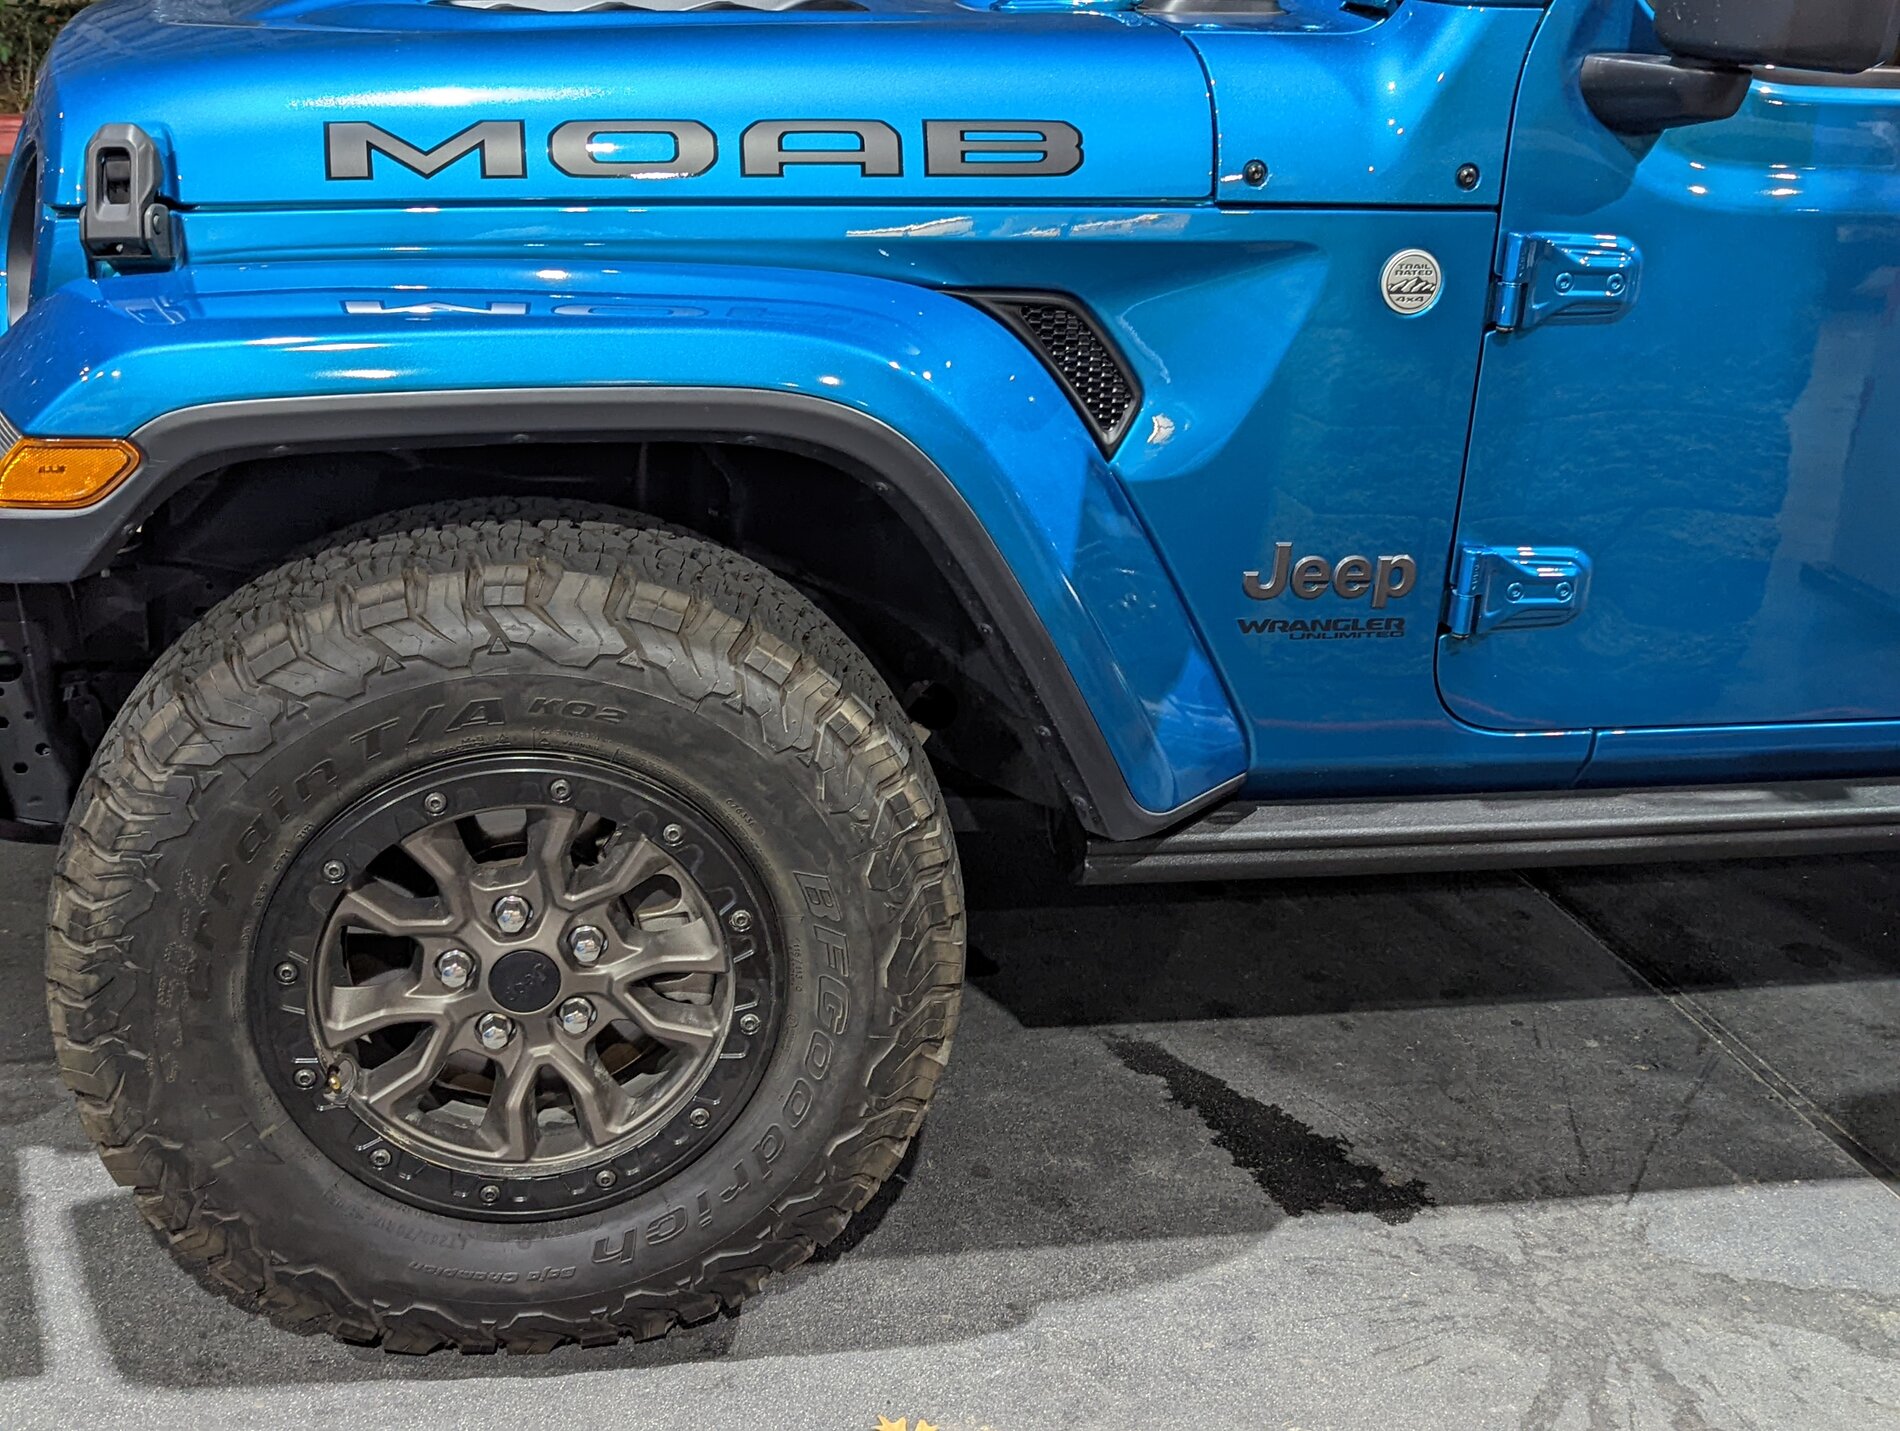 Mopar wheels from JL xtreme recon package. Not bronze | Jeep Gladiator  Forum 